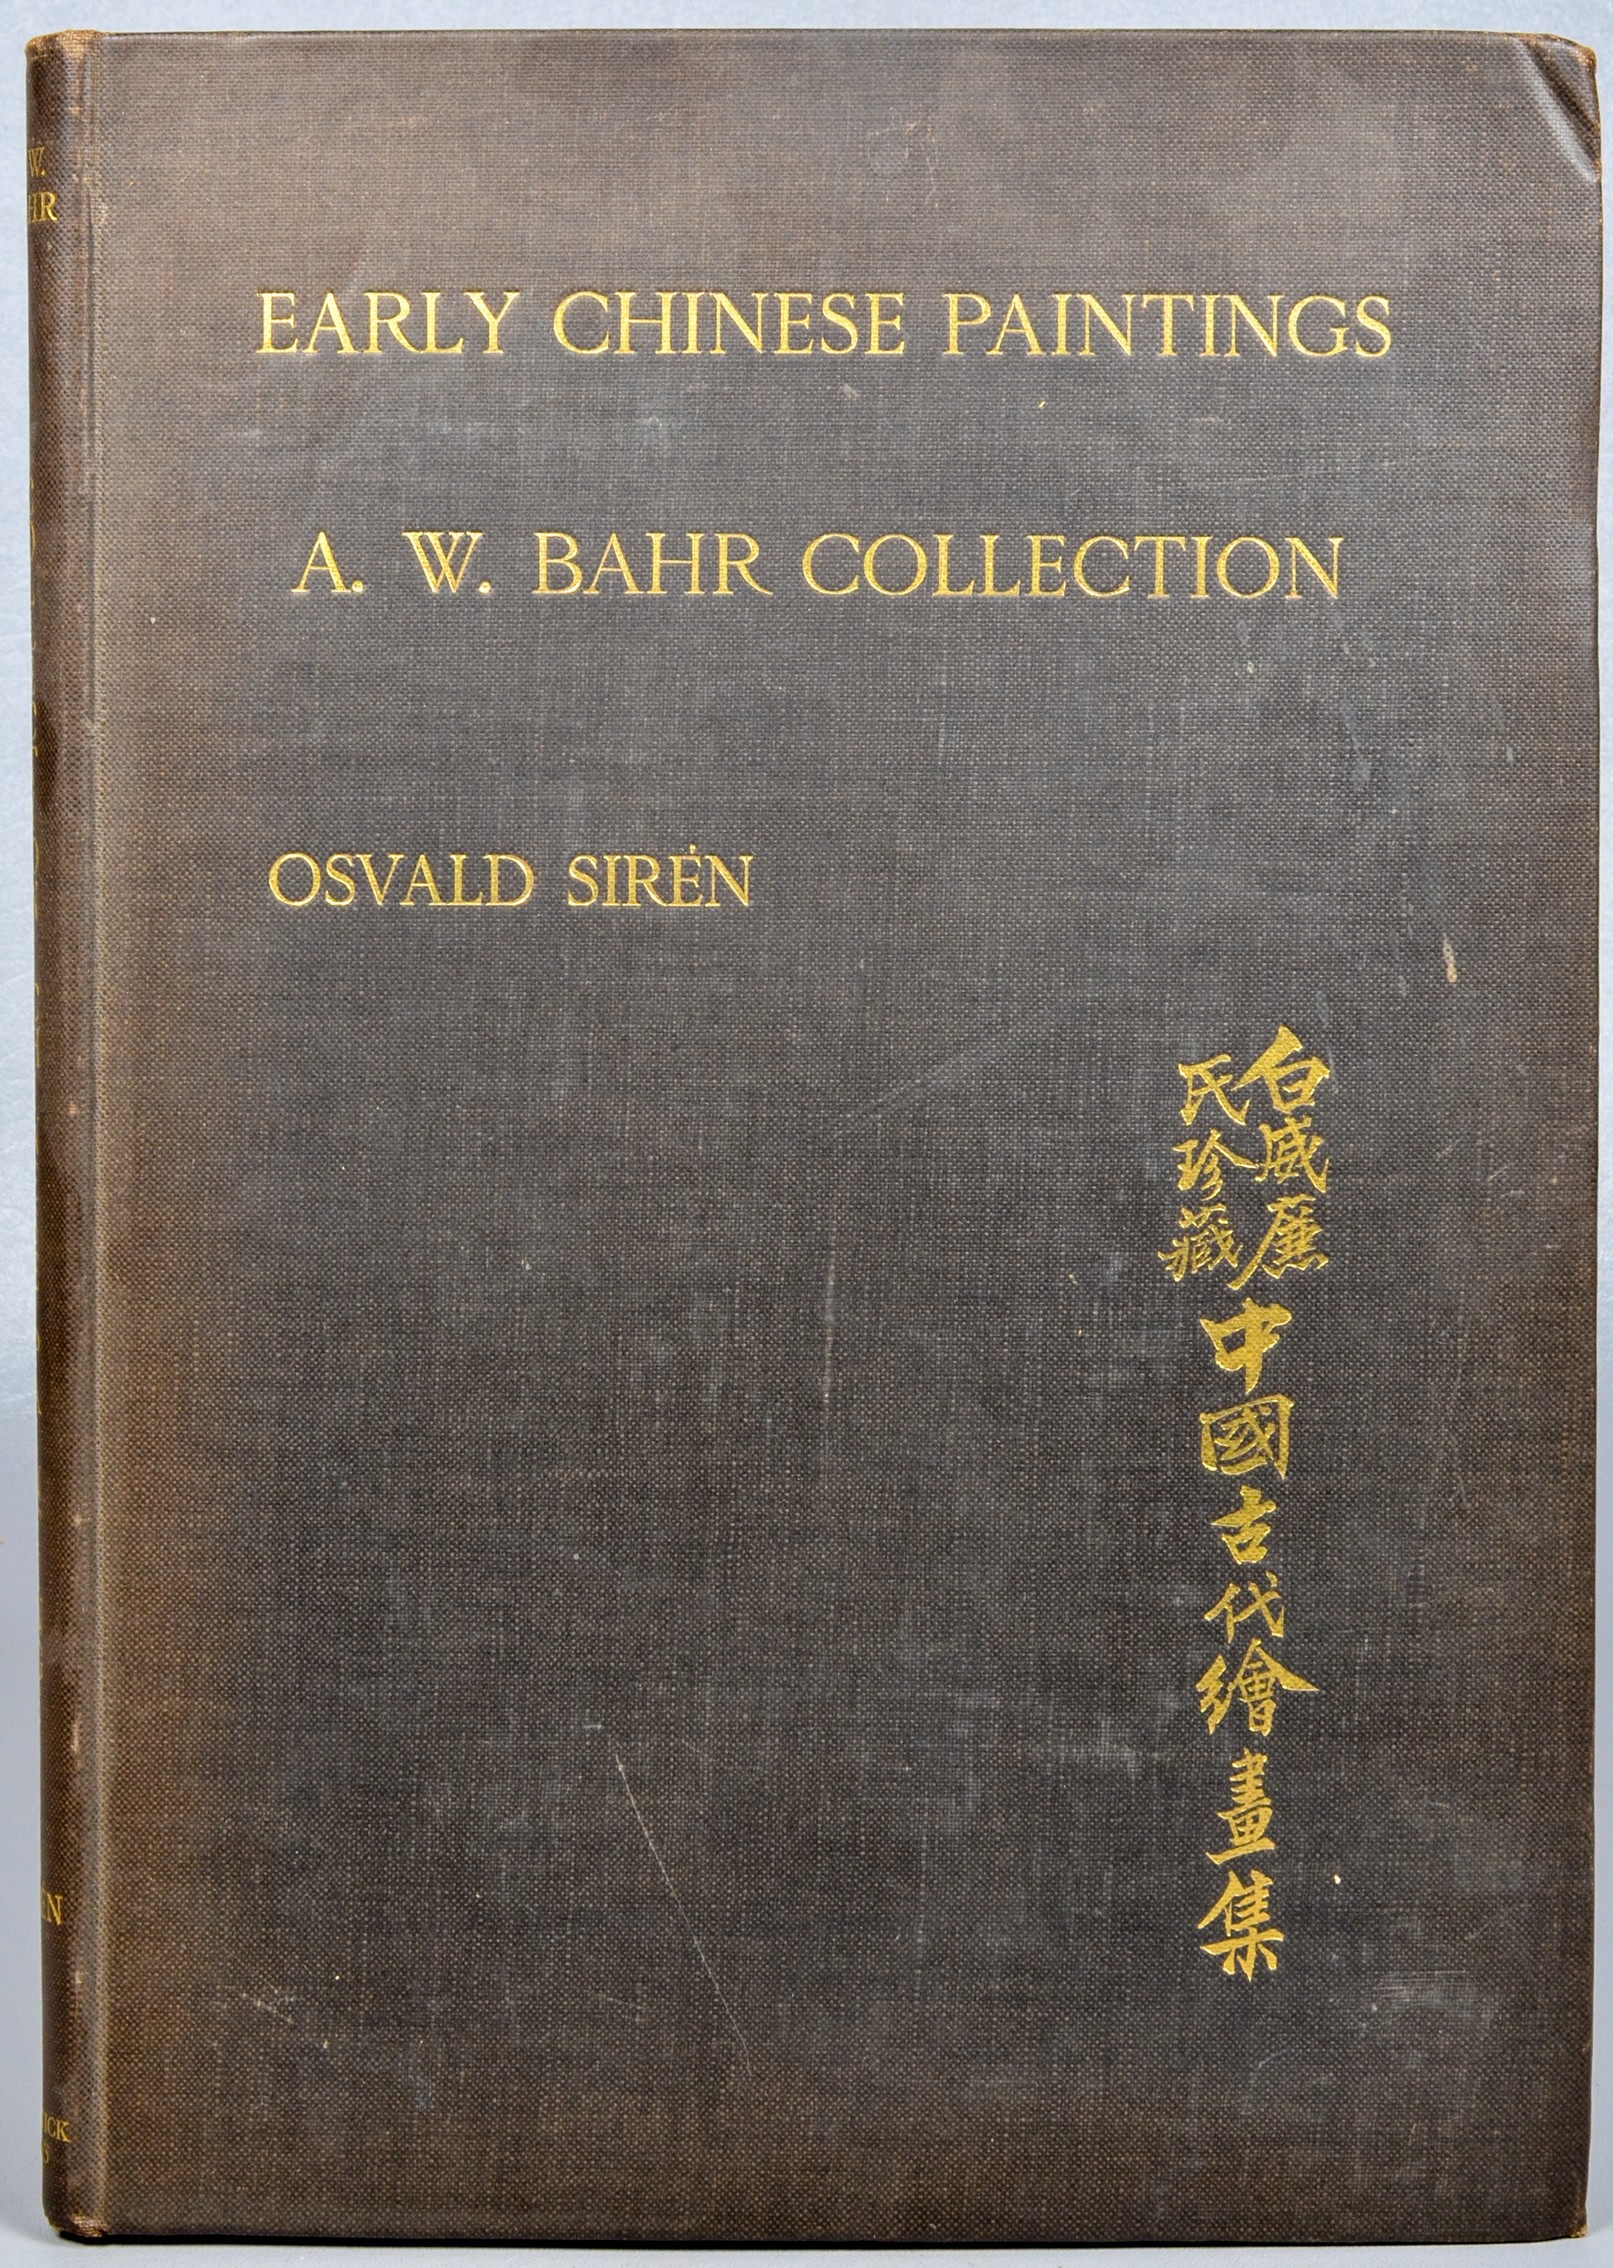 Early Chinese Paintings from A.